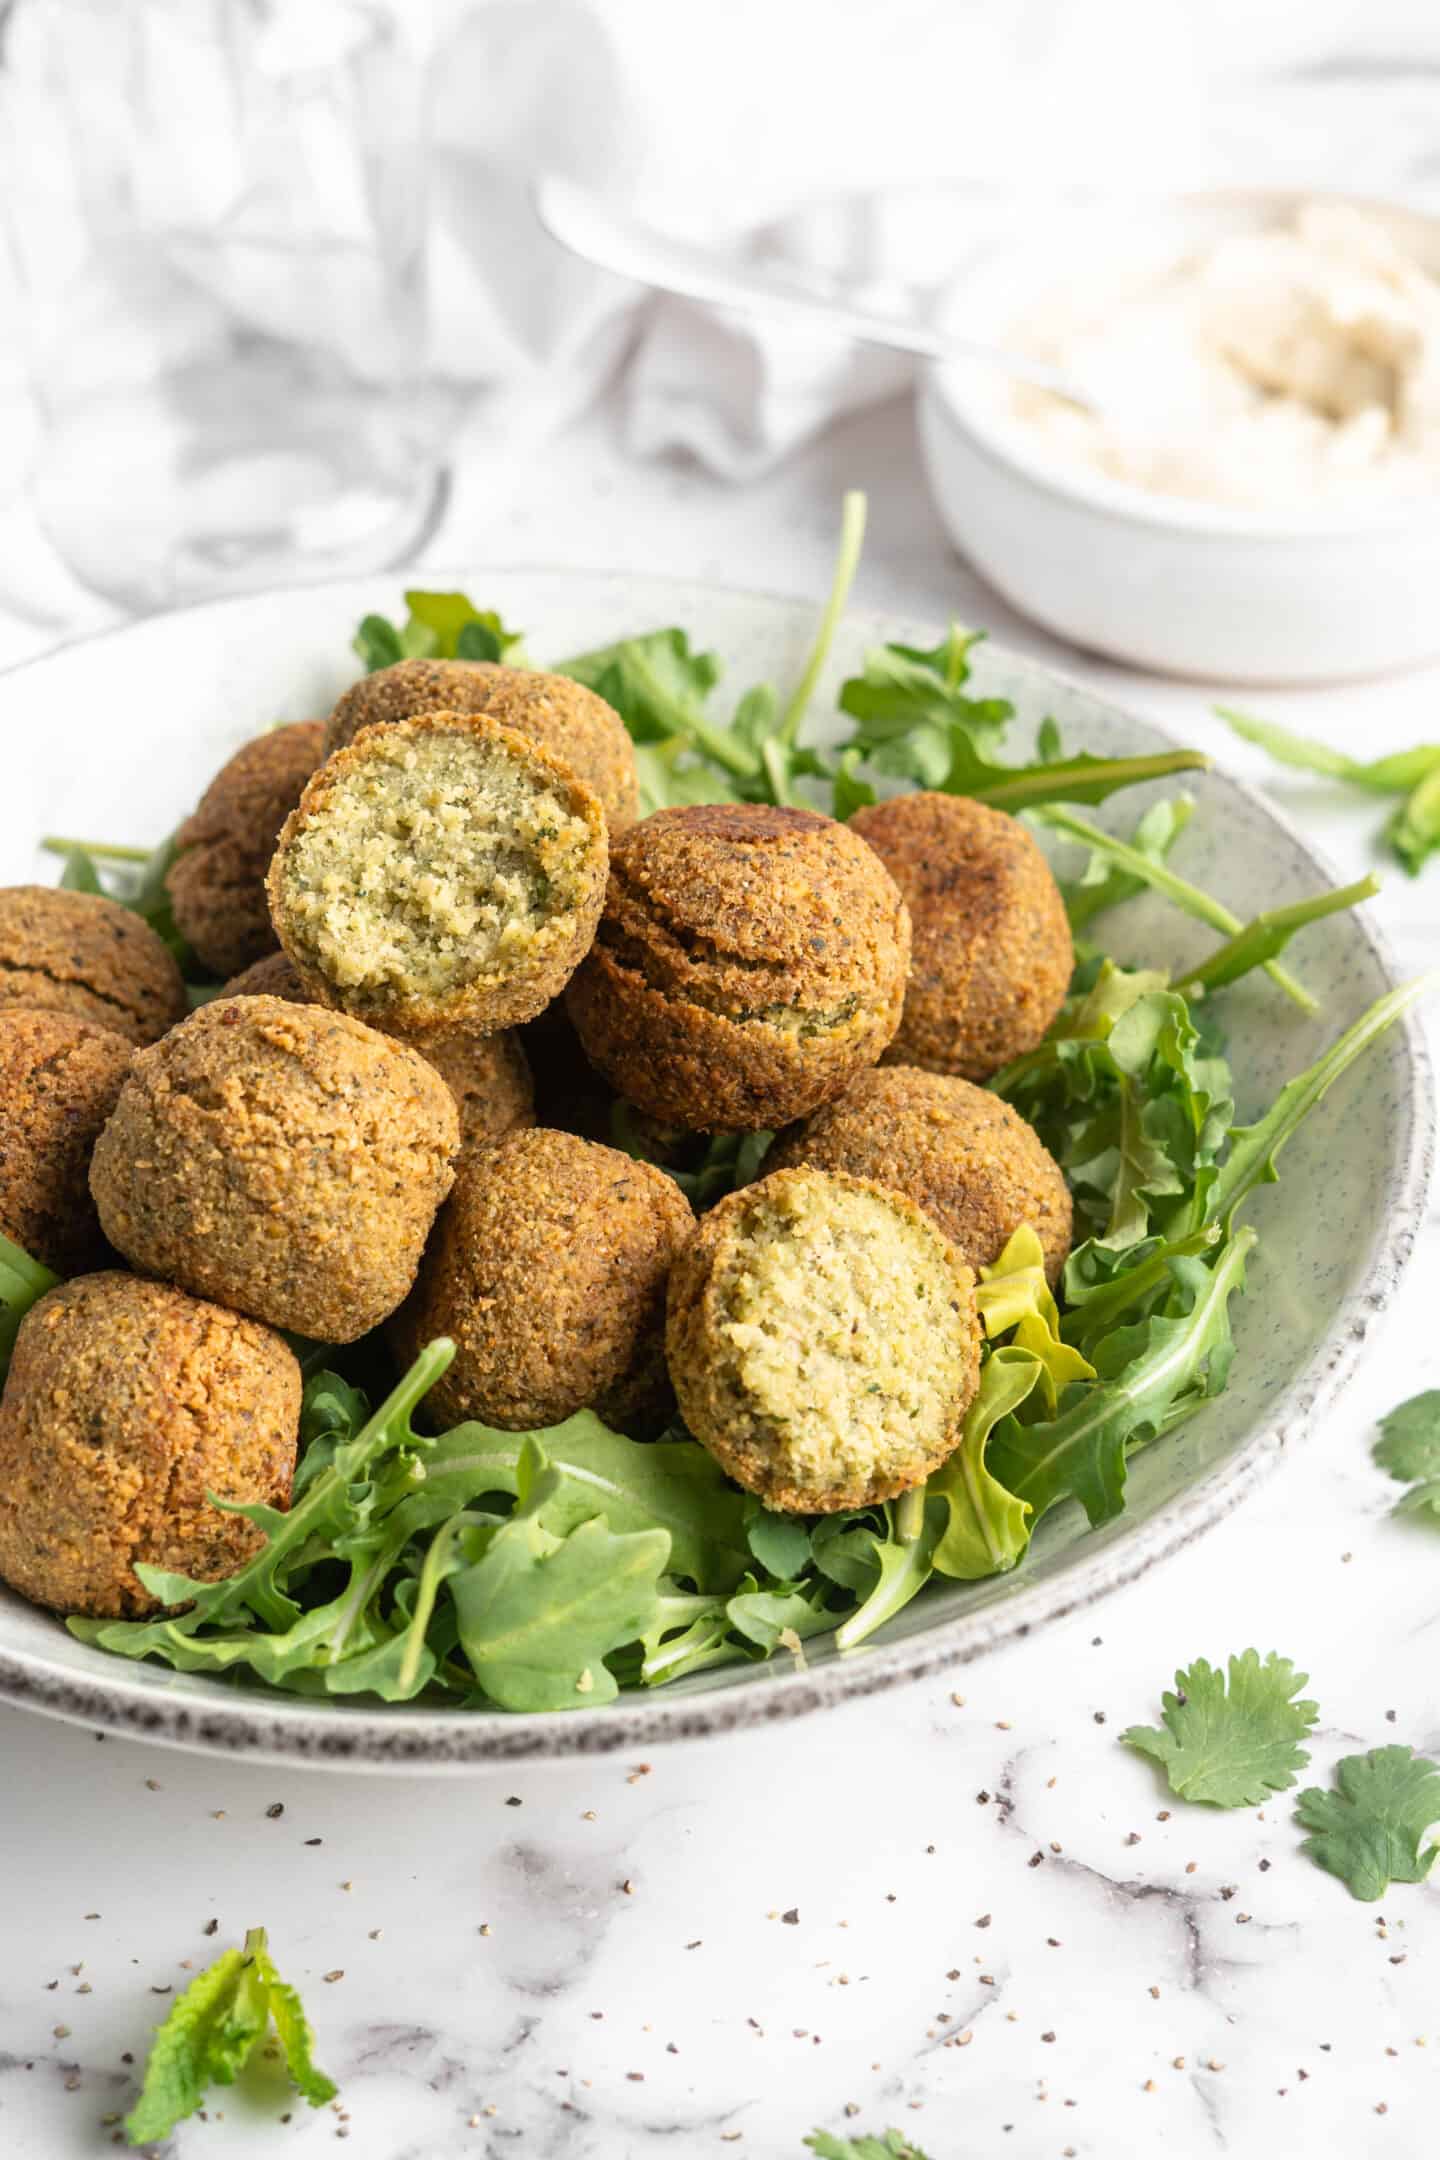 Falafel stacked in bowl of greens